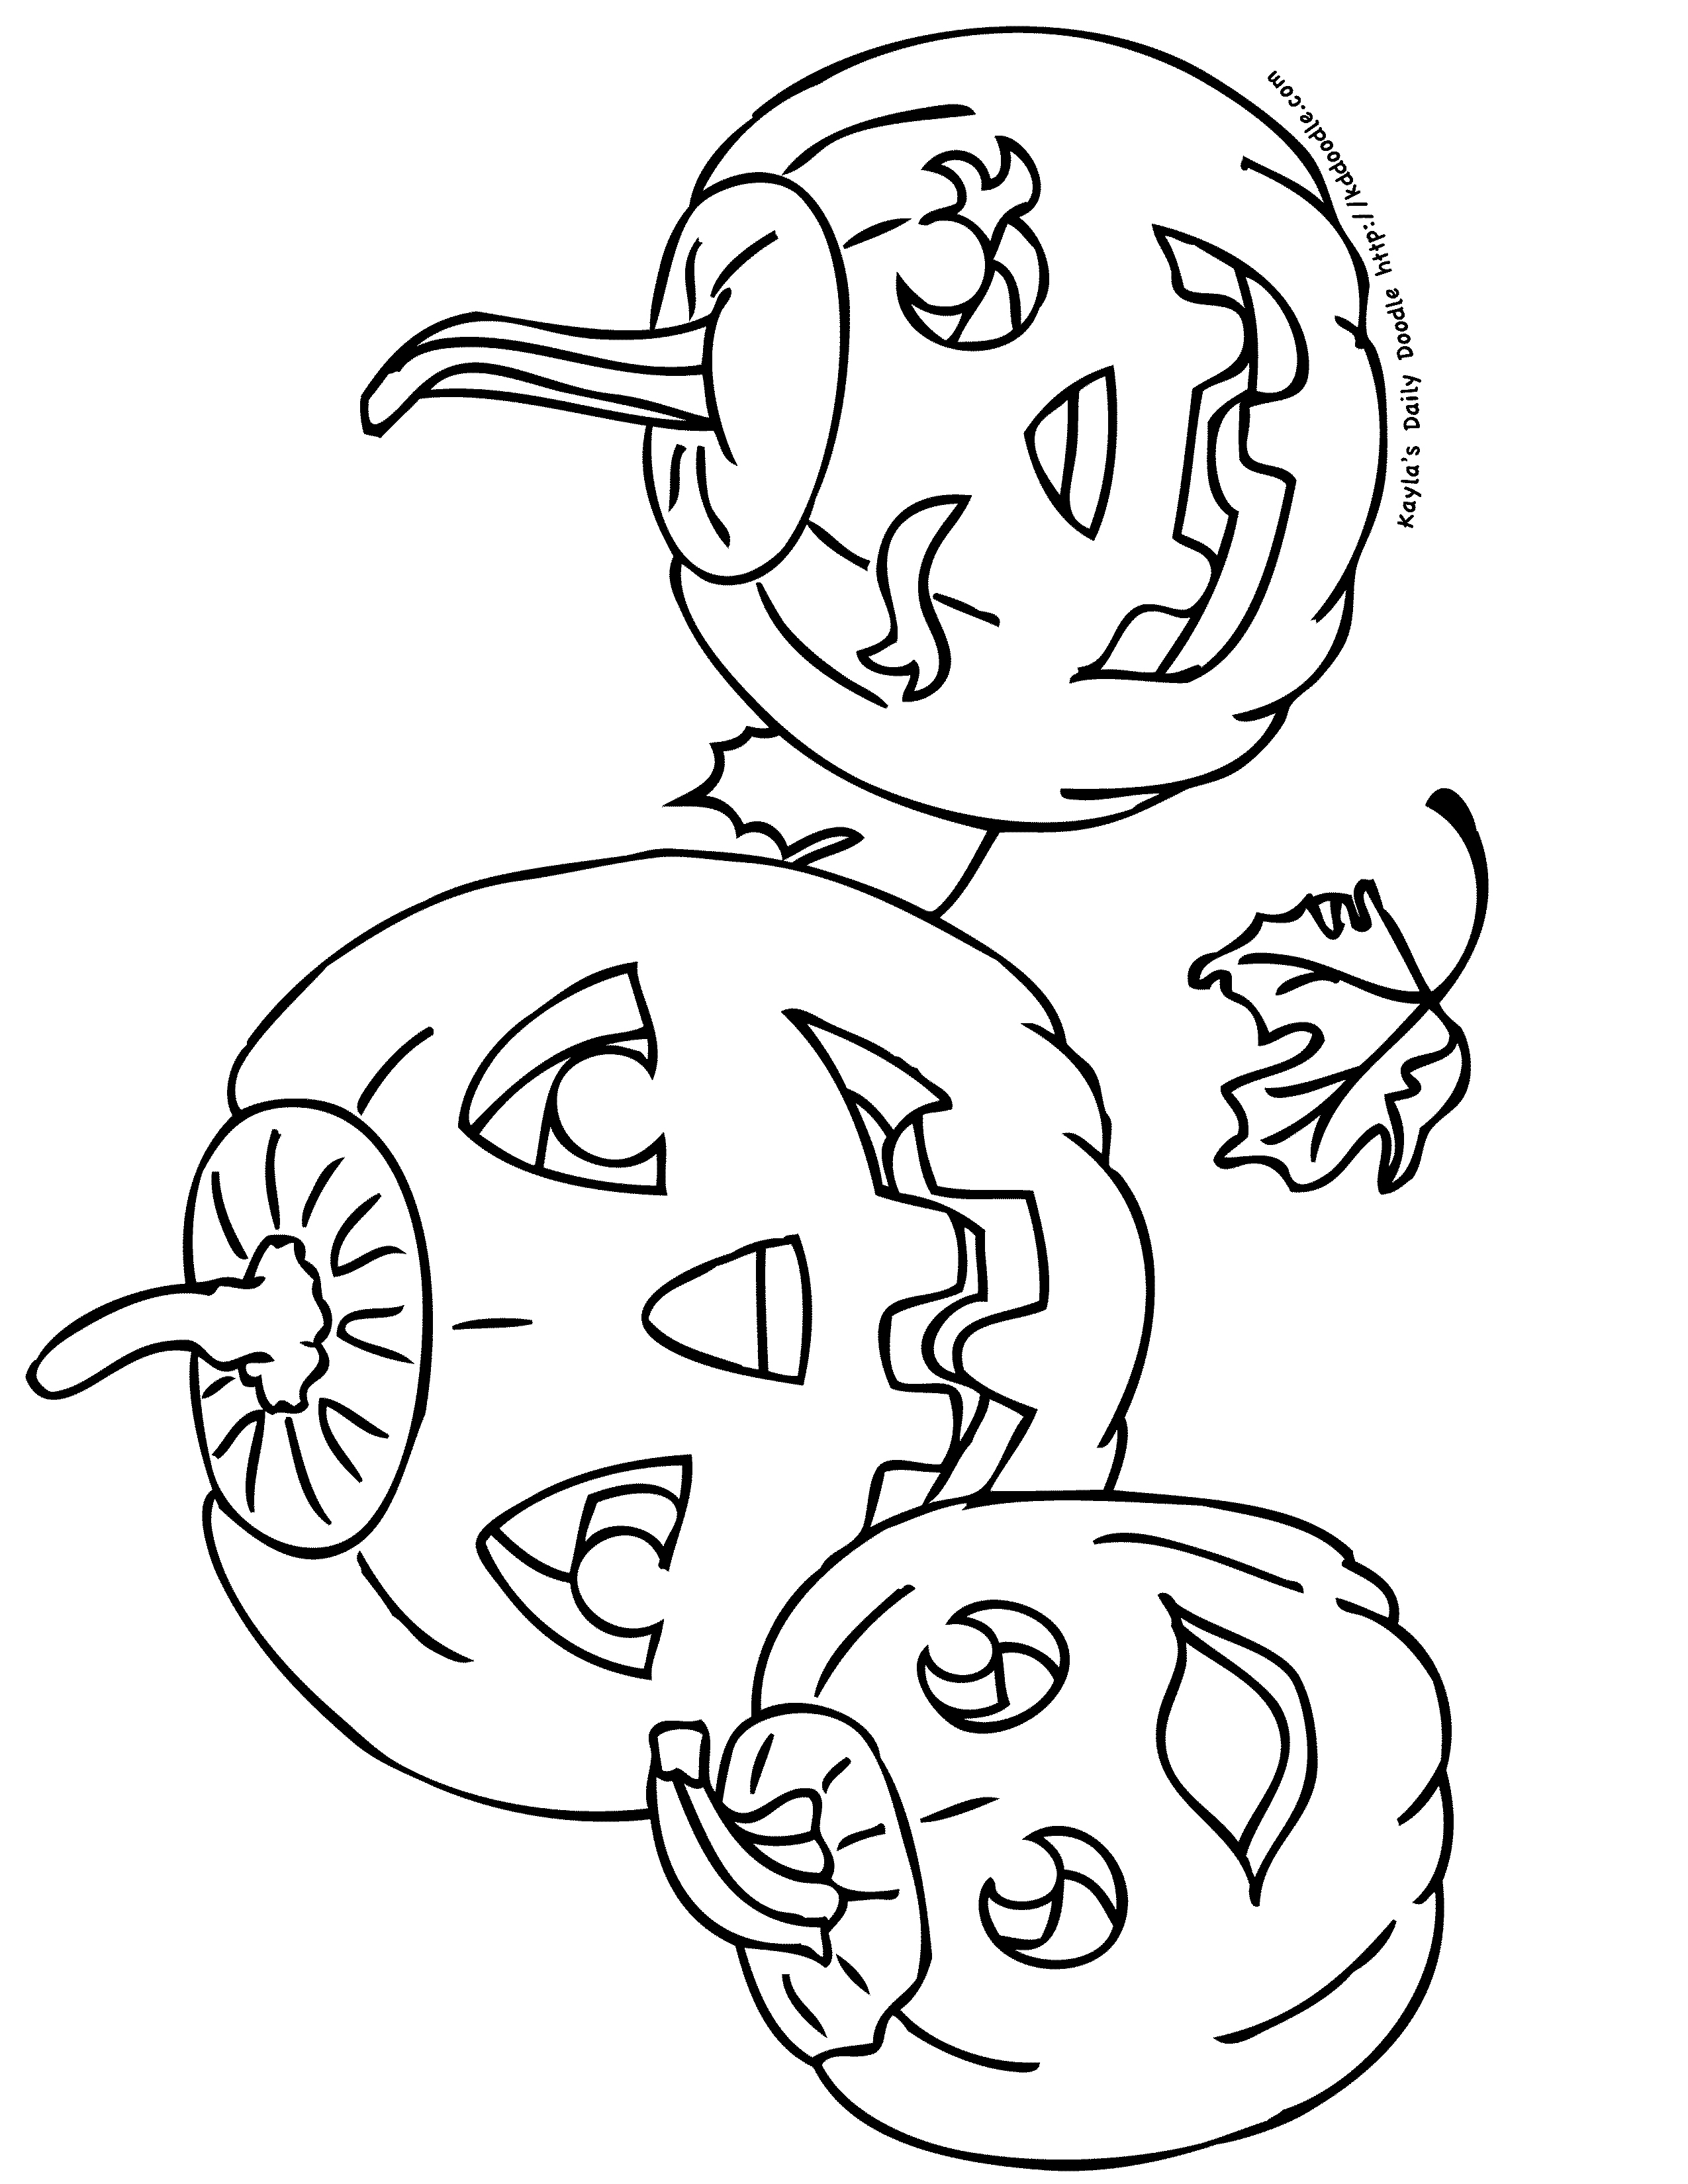 Happy Jack O Lantern Coloring Pages at GetColorings.com | Free